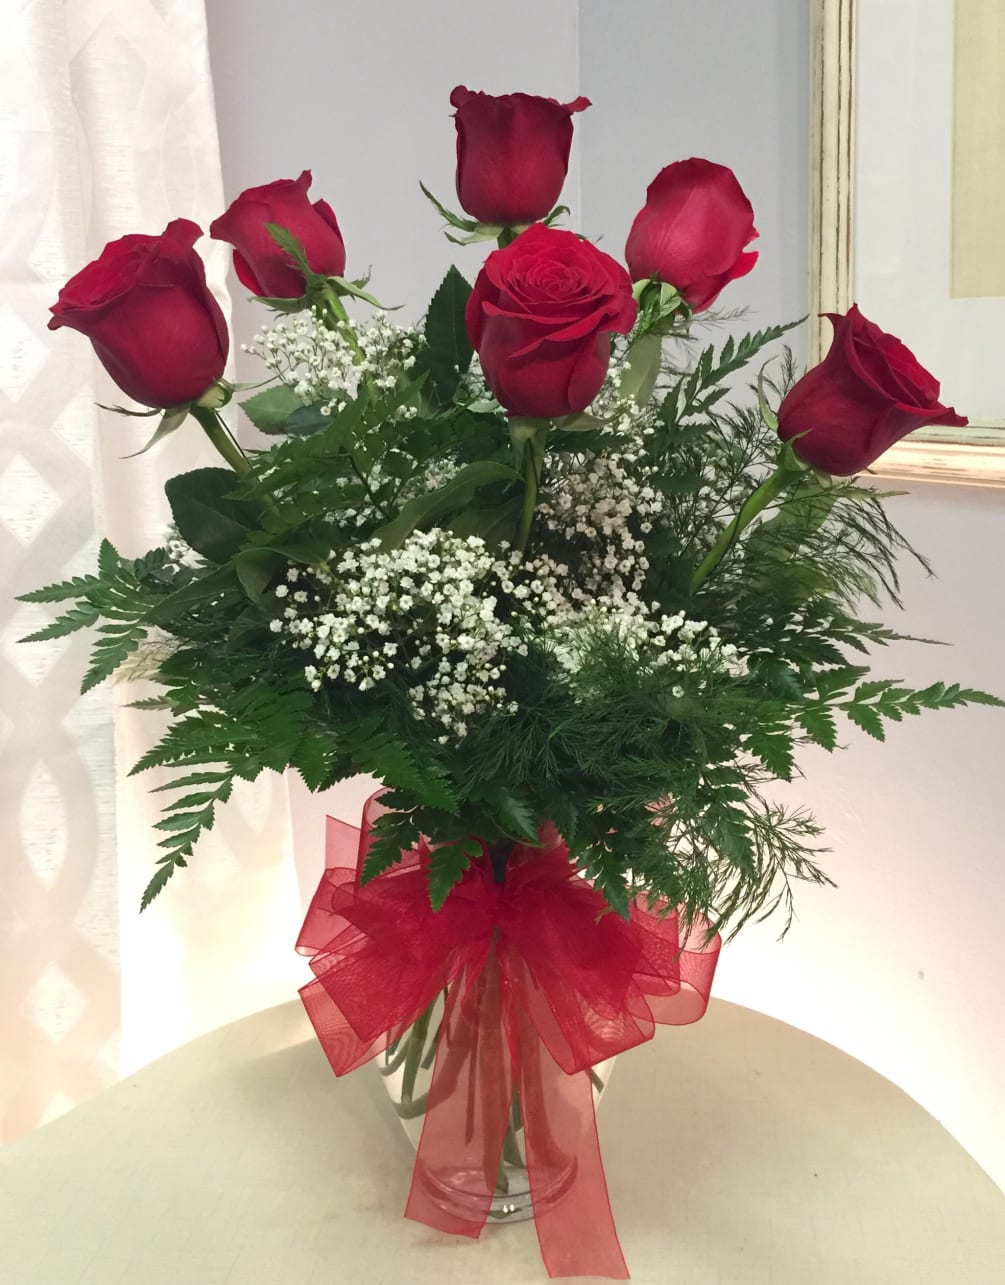 6 premium red roses arranged on a bed of lush greens and